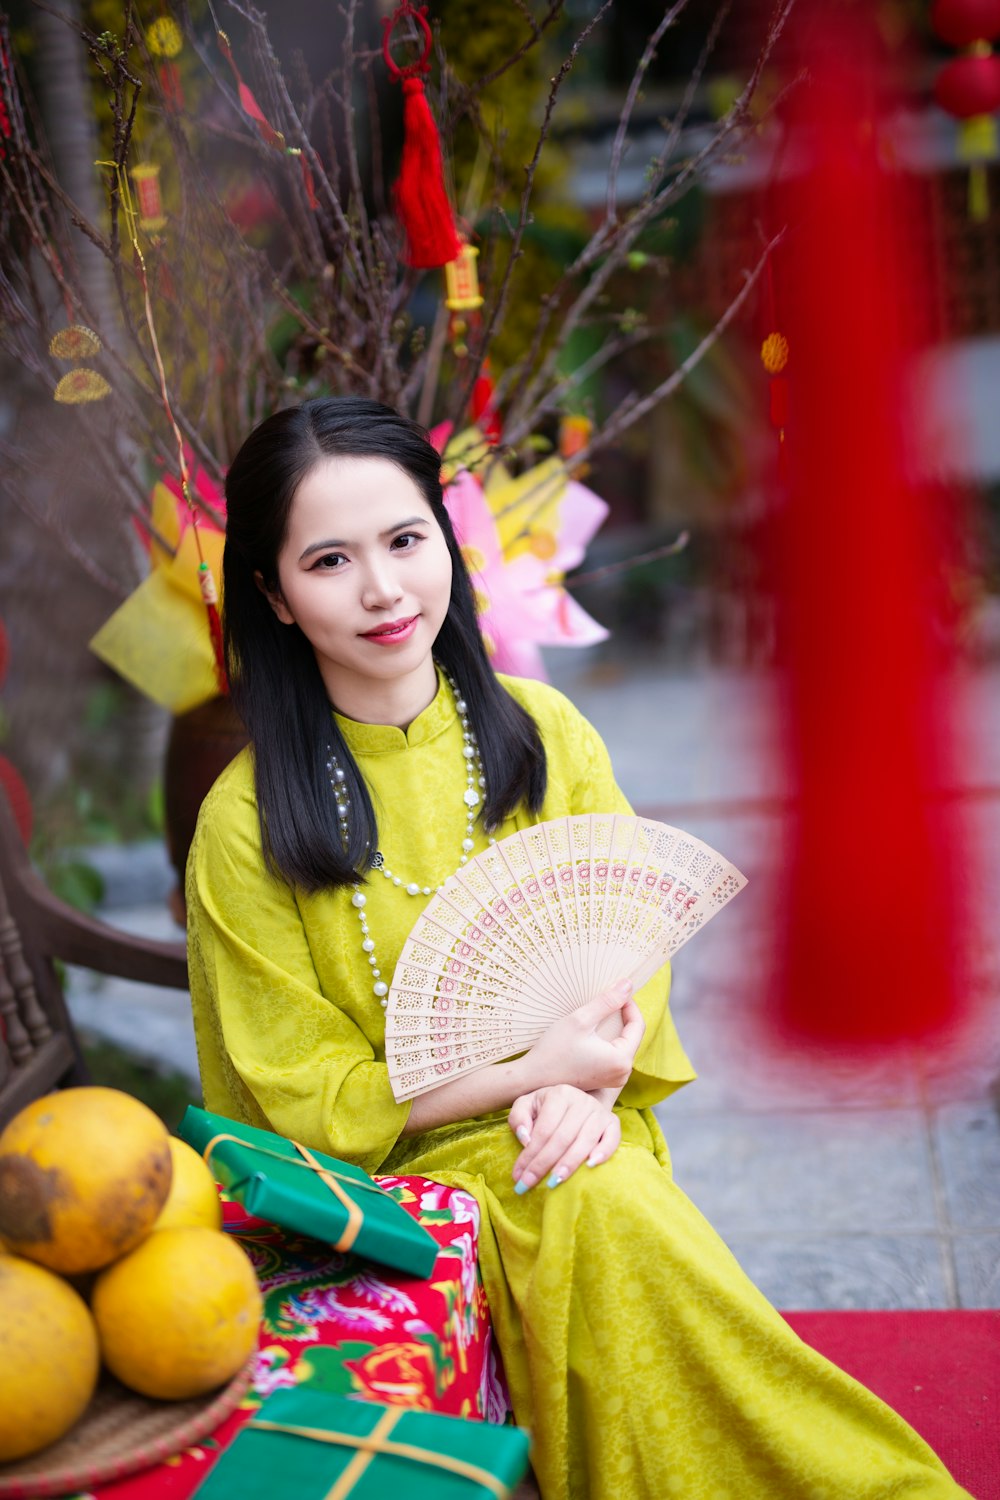 a woman sitting on a bench holding a fan